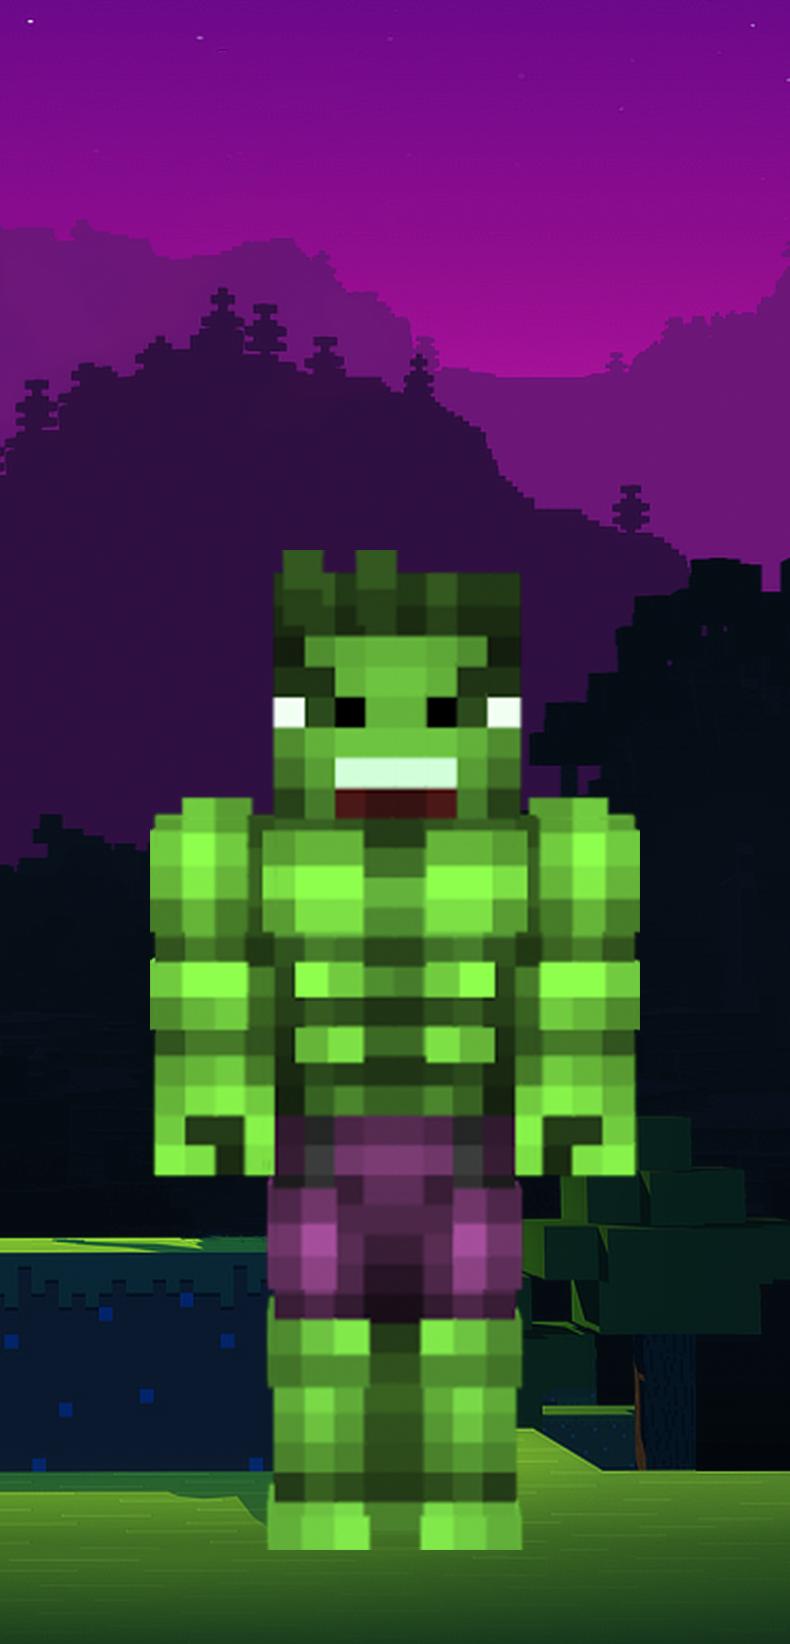 Hulk Skin for Minecraft for Android - APK Download